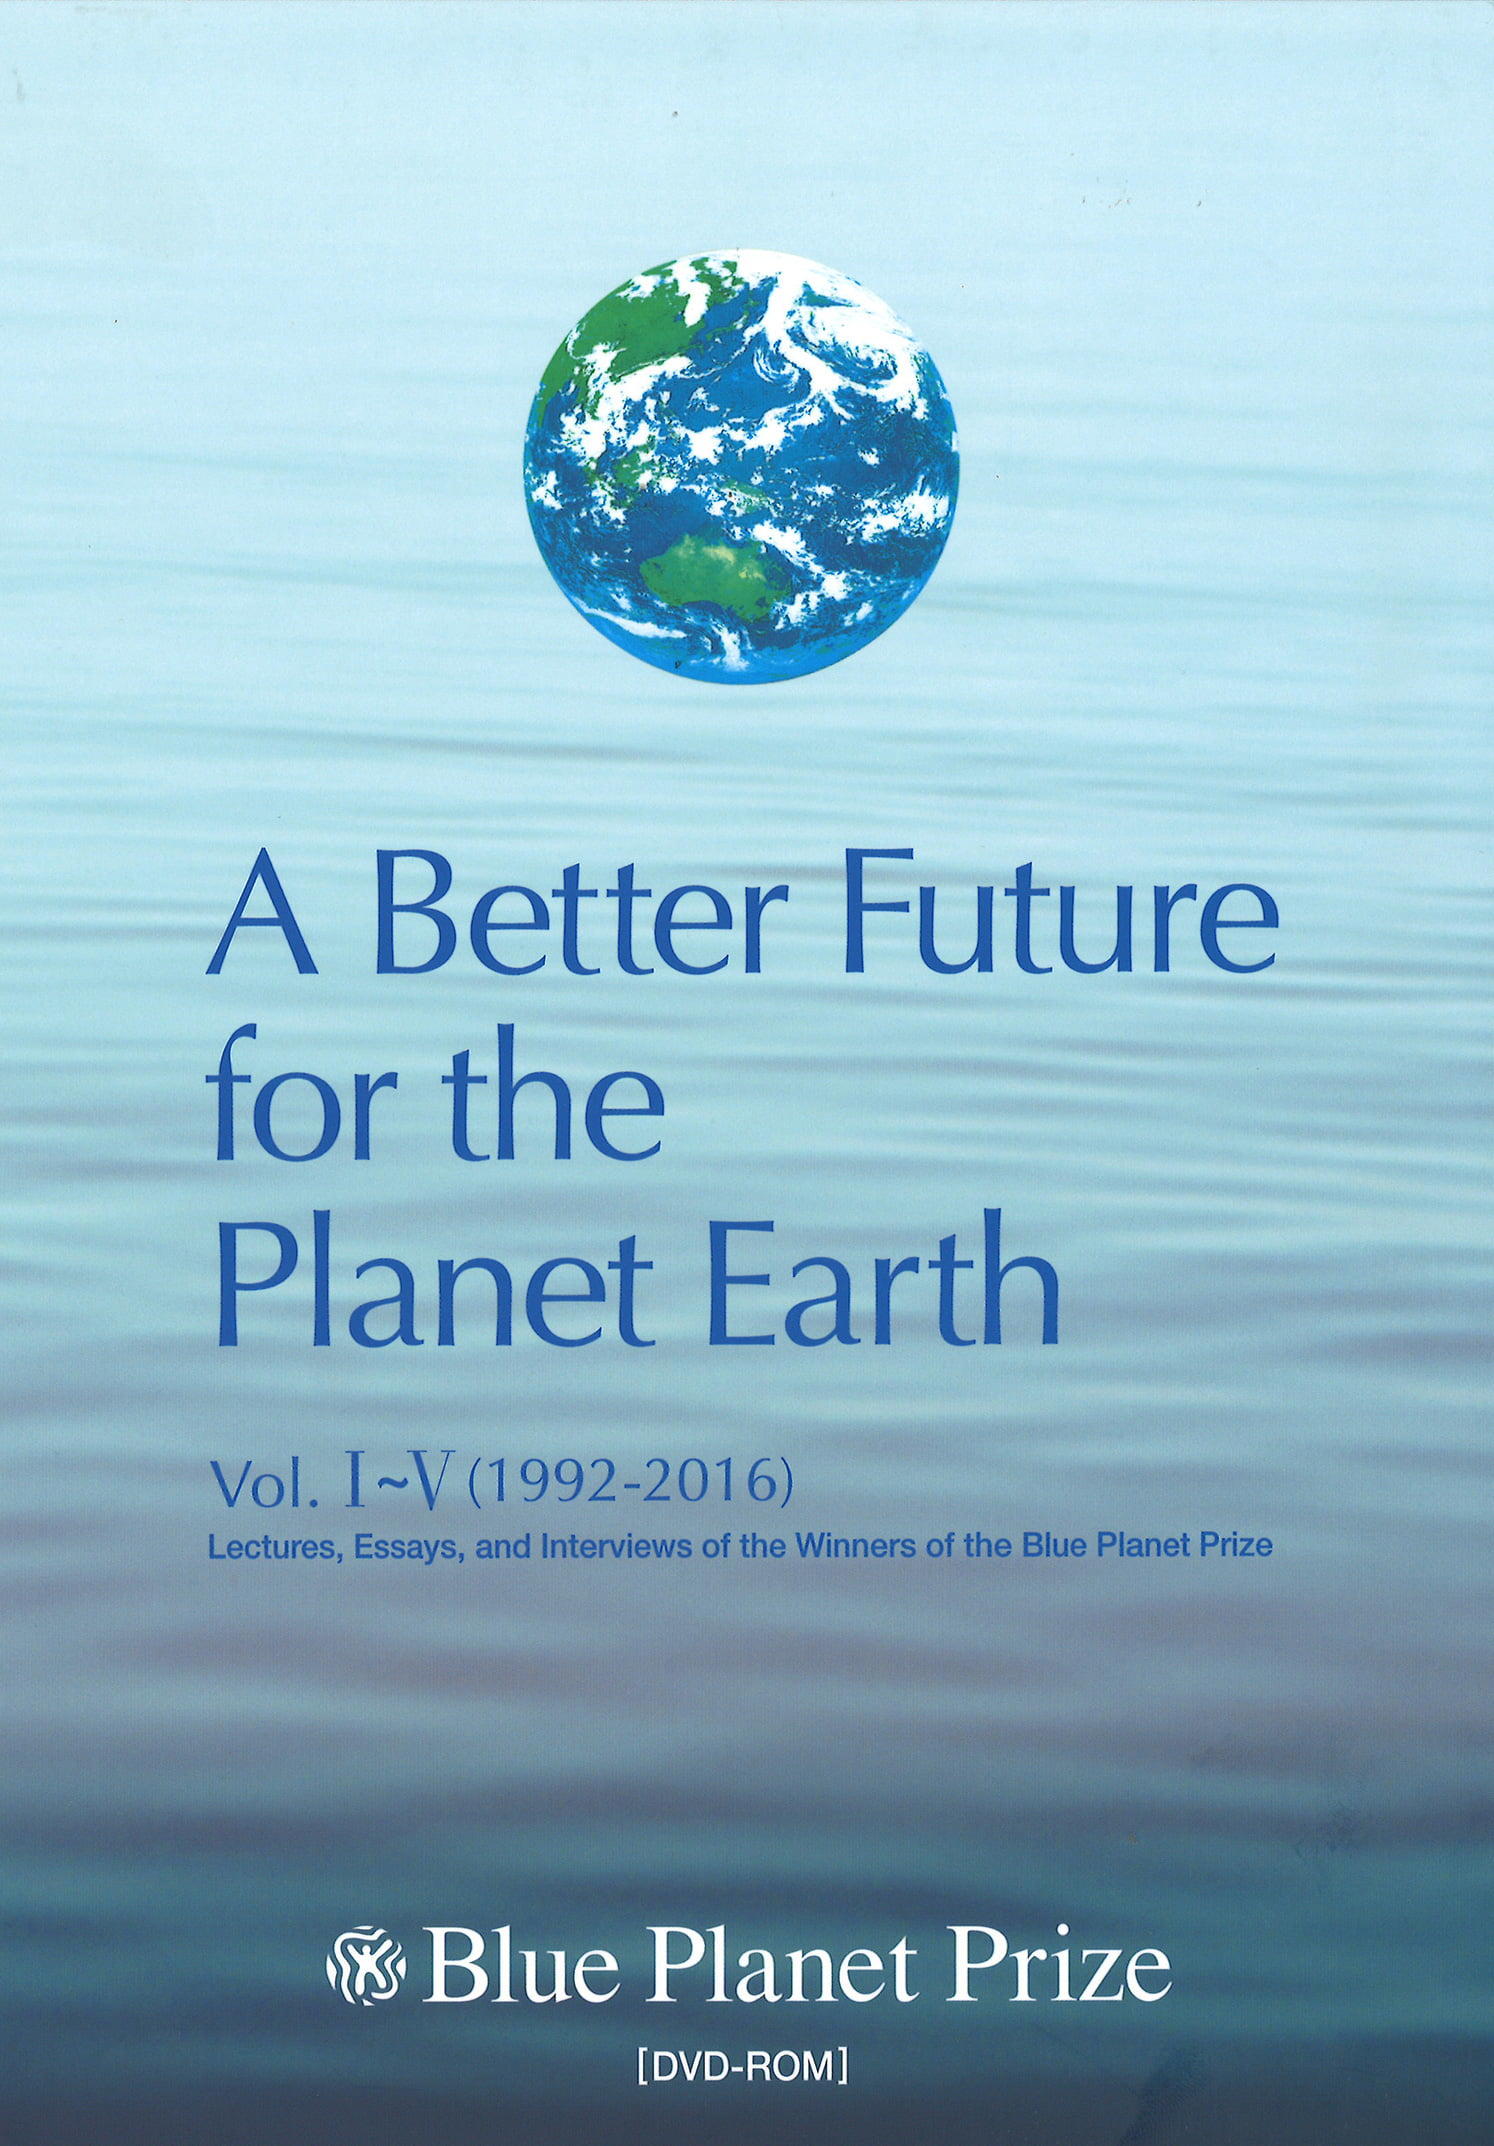 A Better Future for the Planet Earth Vol. III